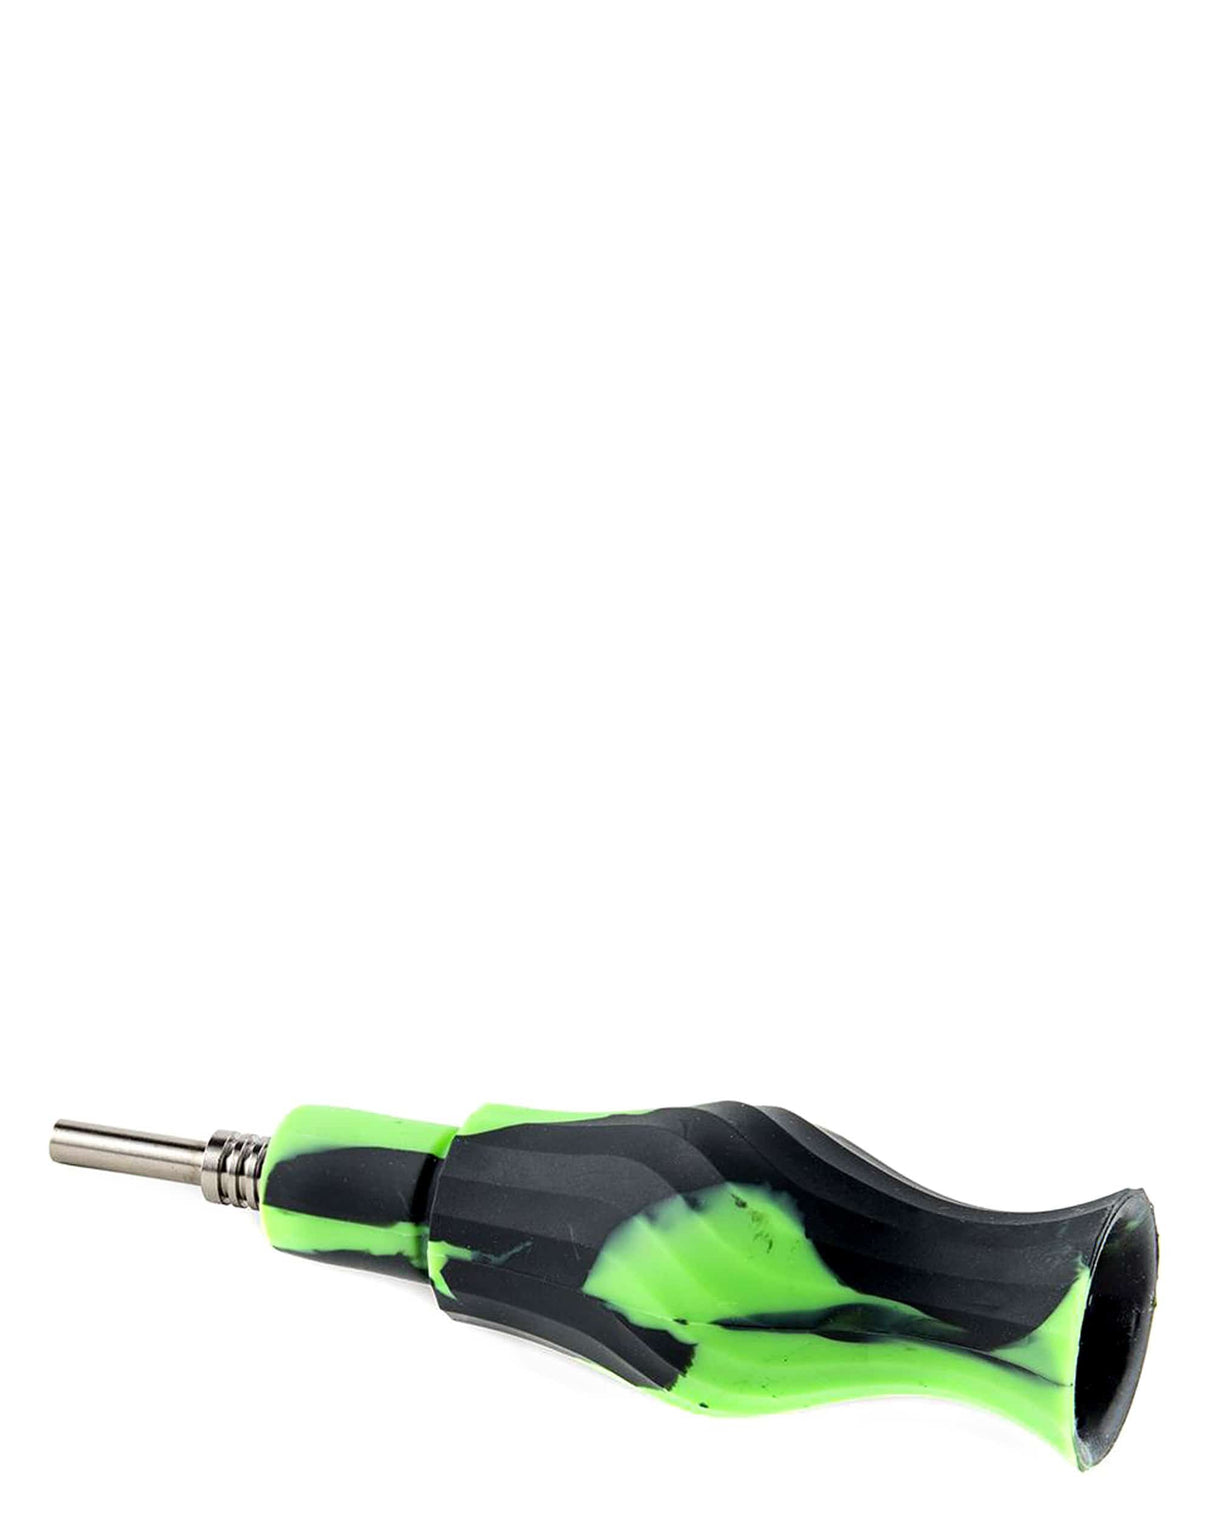 Ooze Clobb 4 in 1 Silicone Pipe in Black and Green, Side View with Titanium Nail